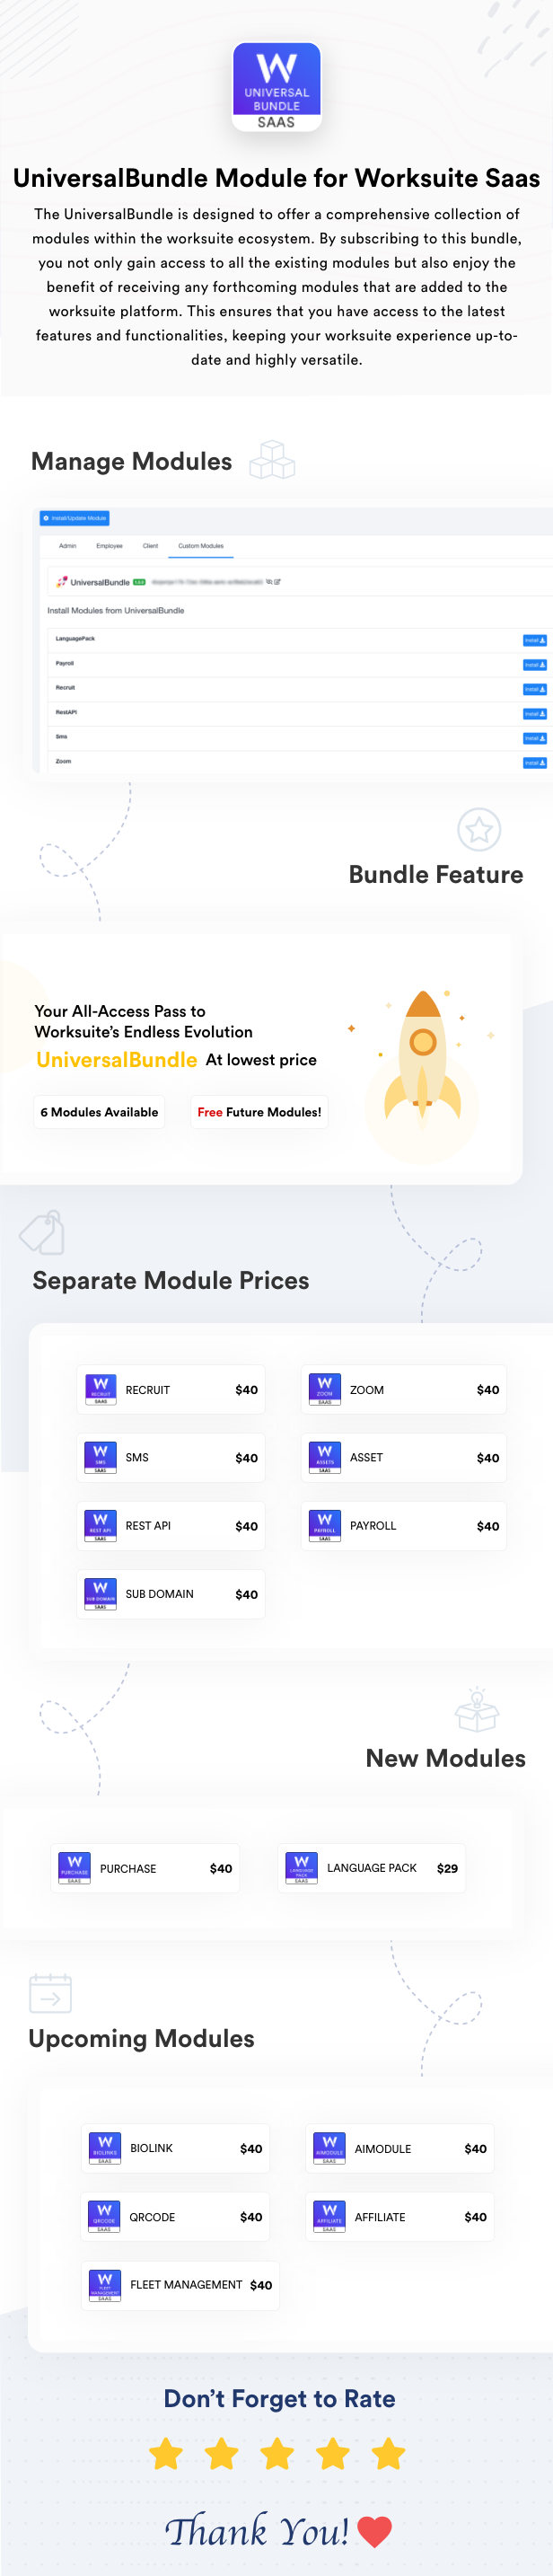 Universal Modules Bundle for Worksuite SAAS - 3